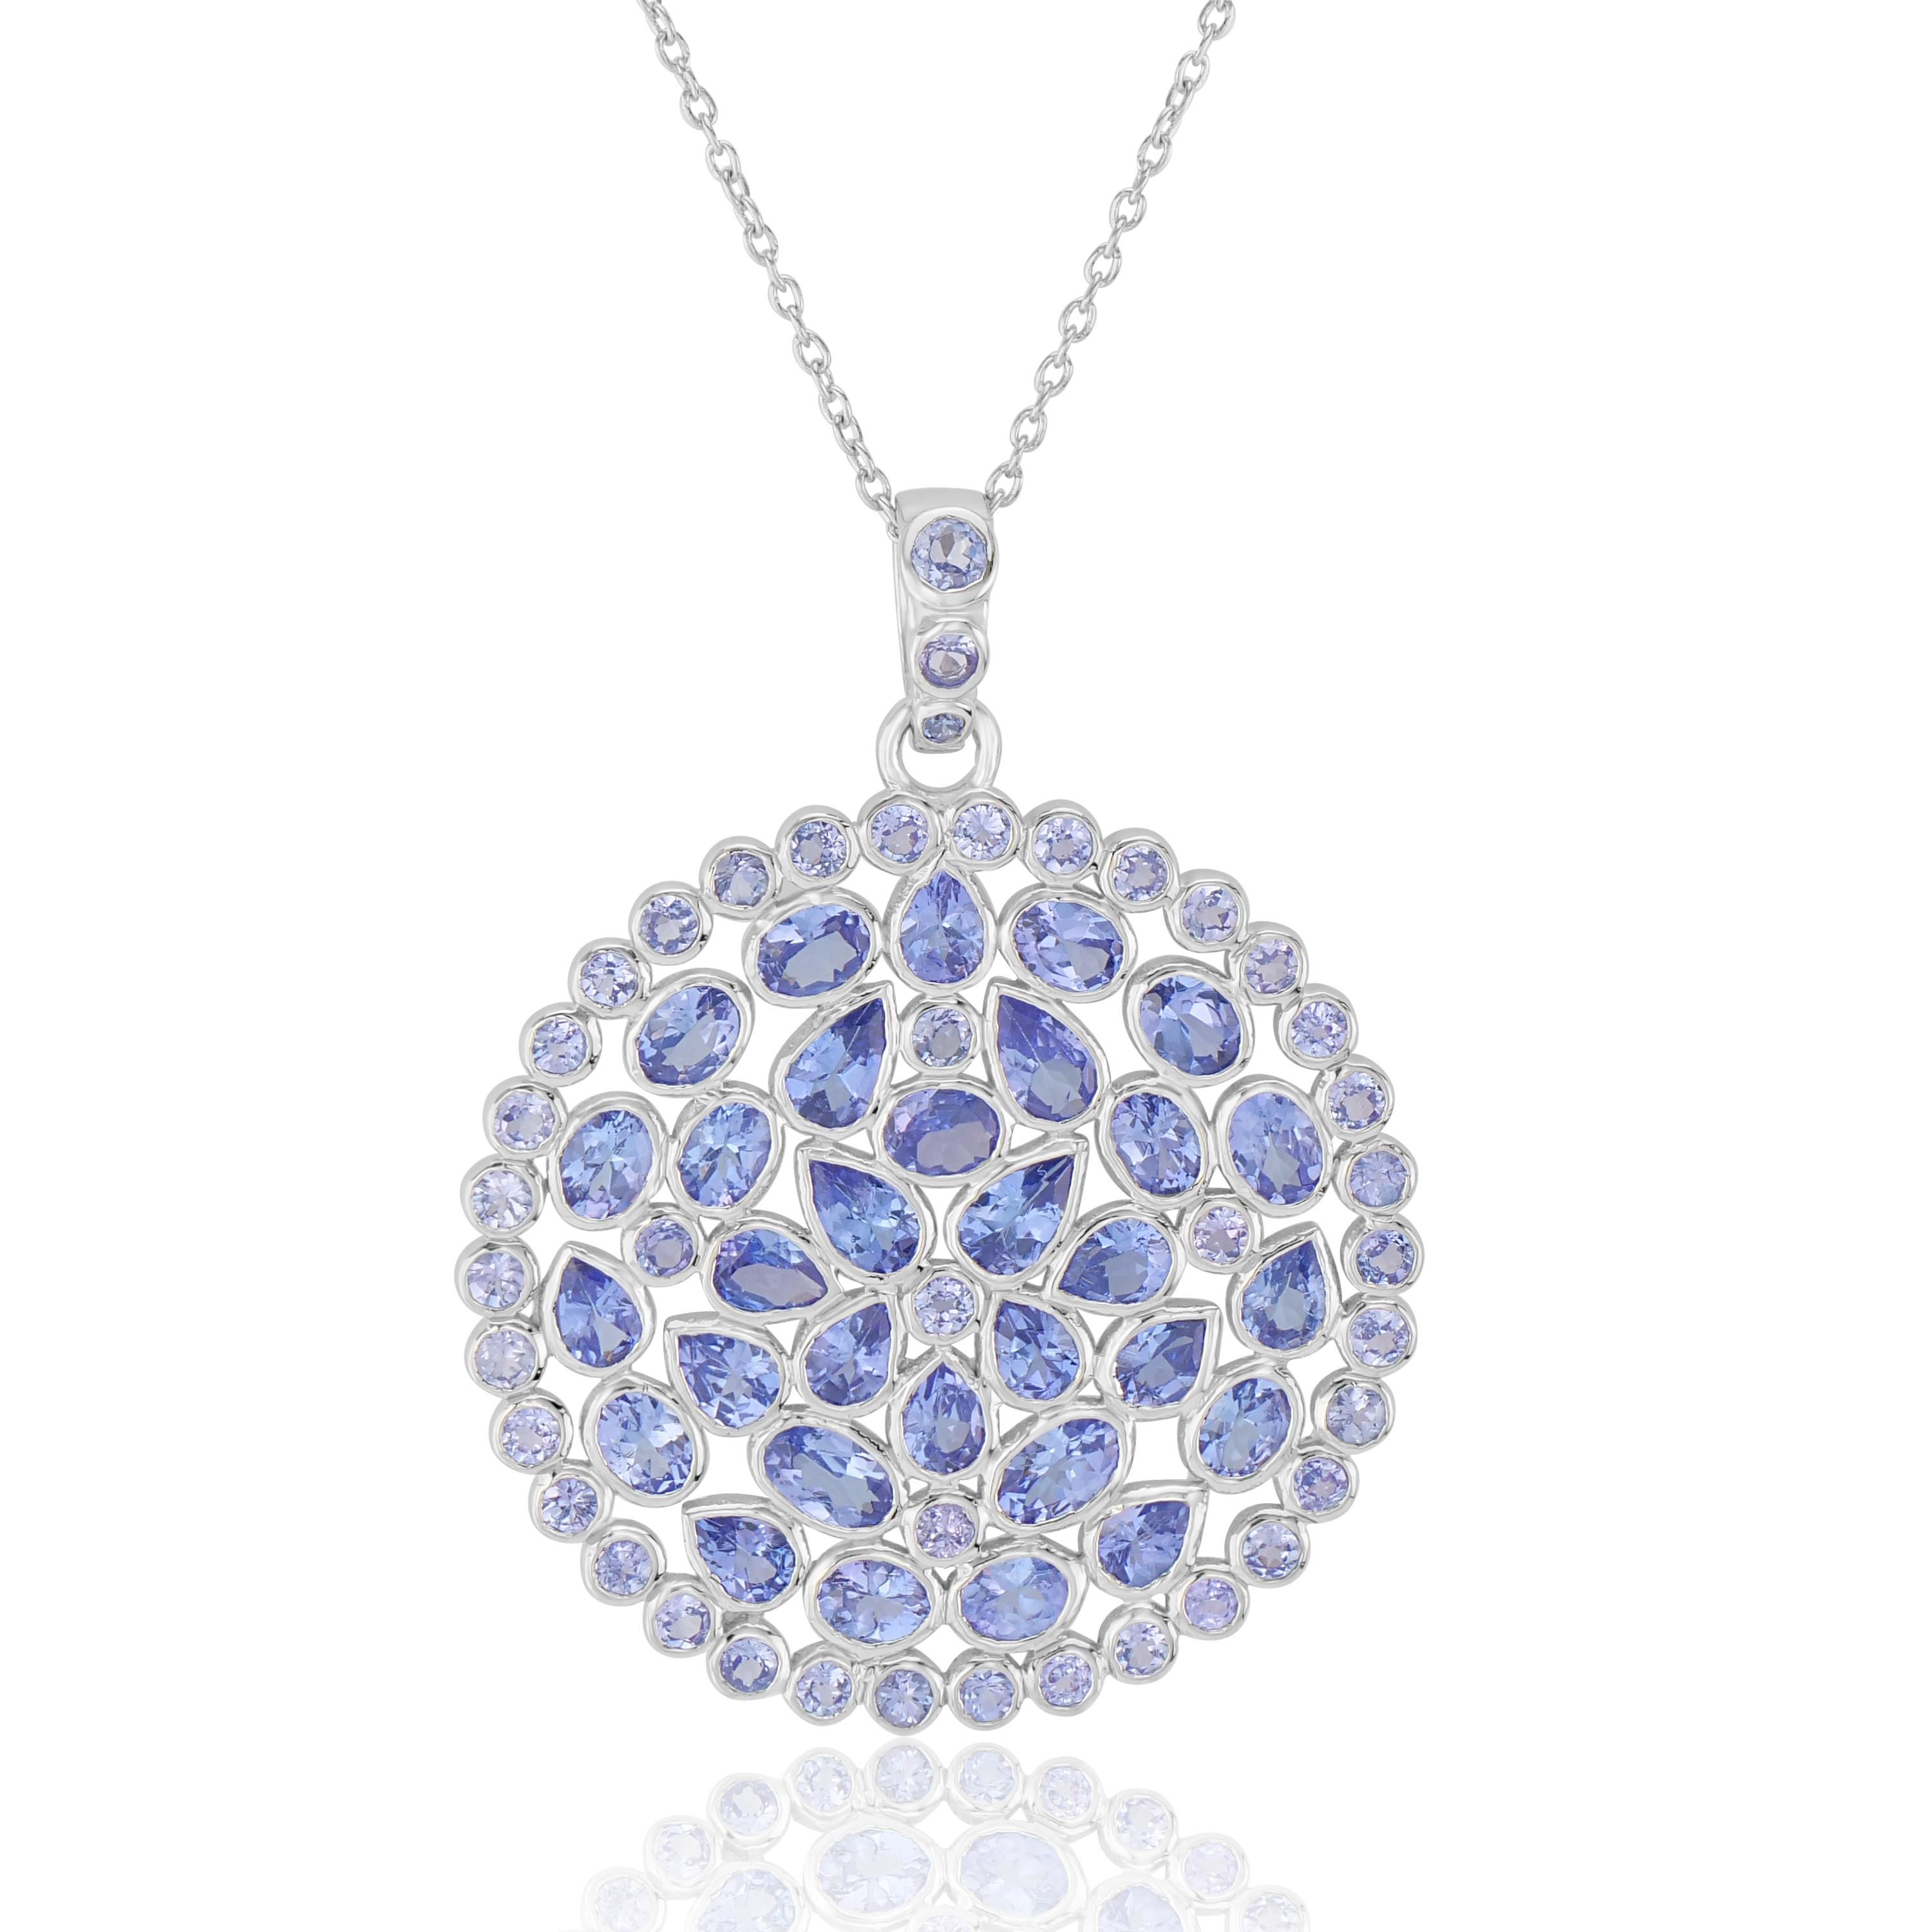 This stunning womens pendant necklace featured with 73 tanzanites in varied shapes and sizes along with 6 white topaz. Crafted in genuine and nickel free 925 sterling silver this pendant suspends from a cable chain.